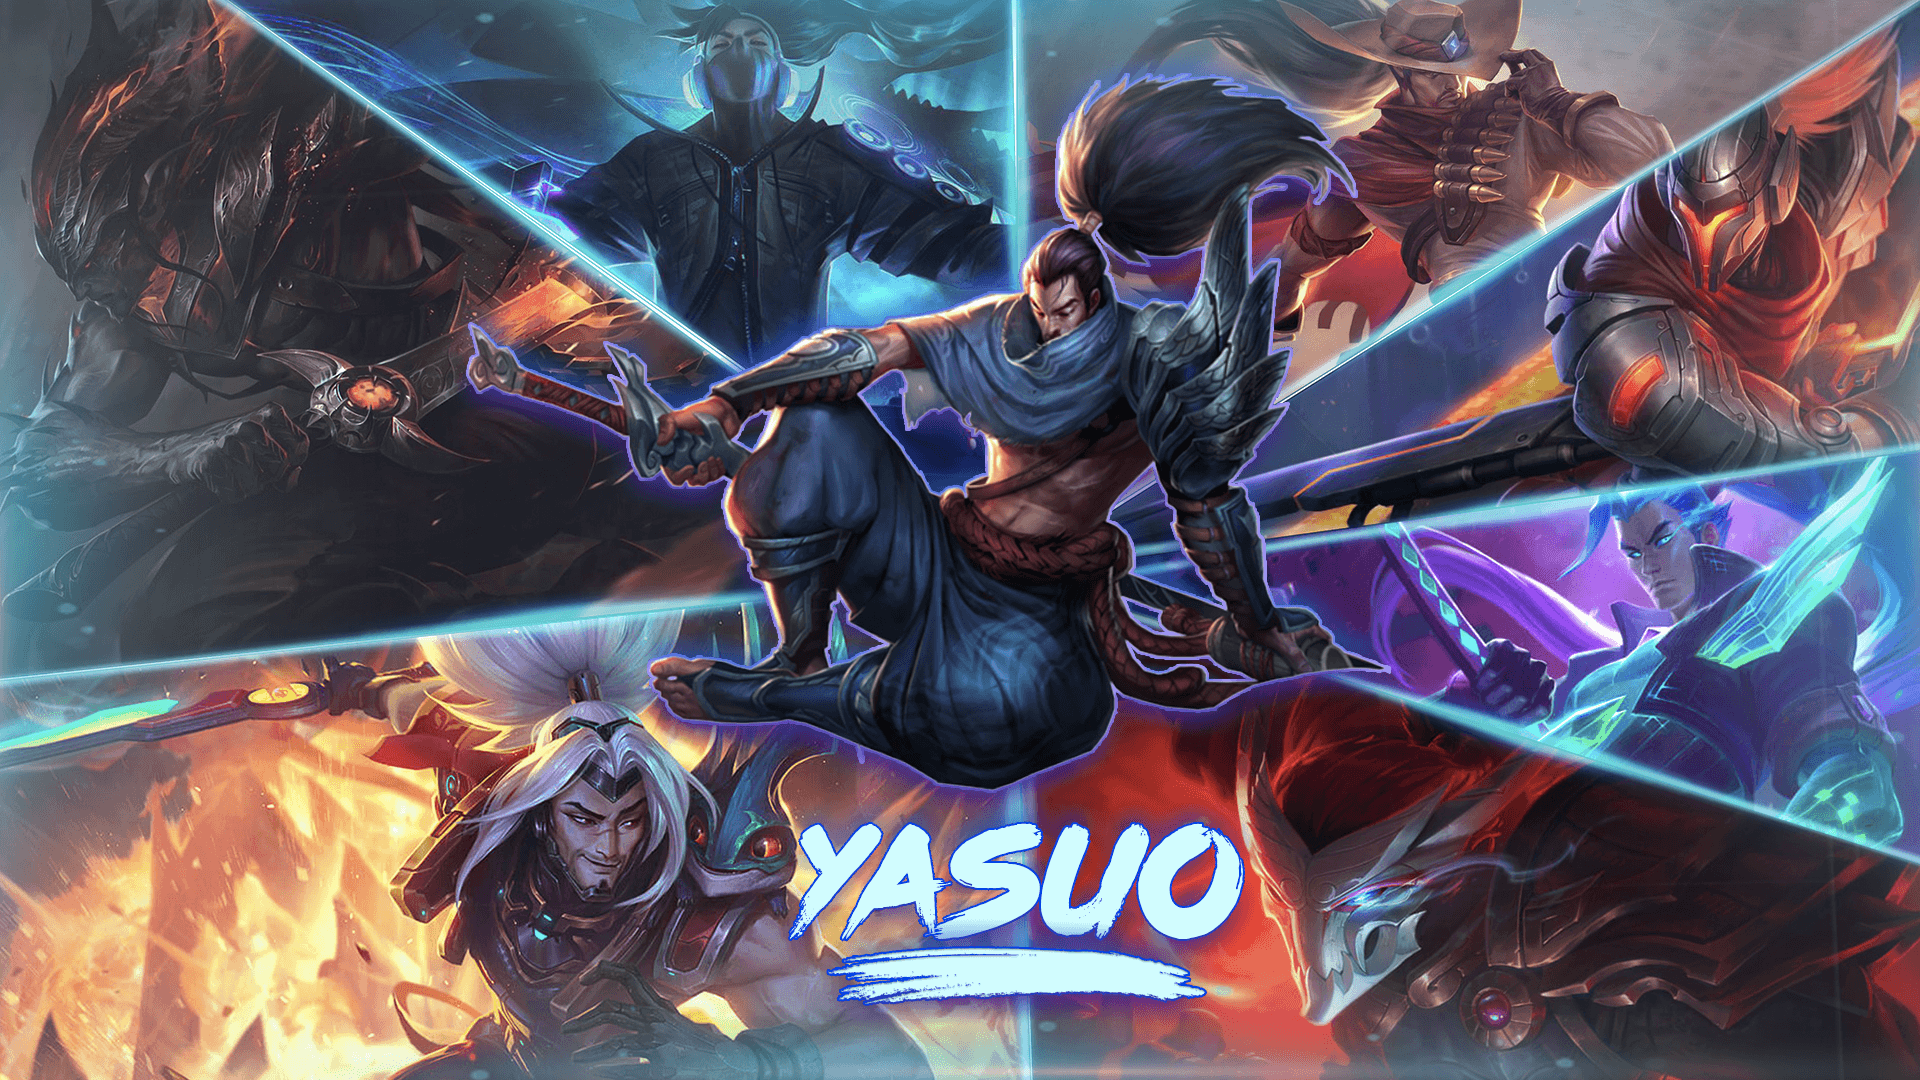 I created an all skins wallpaper for Yasuo True damage skin